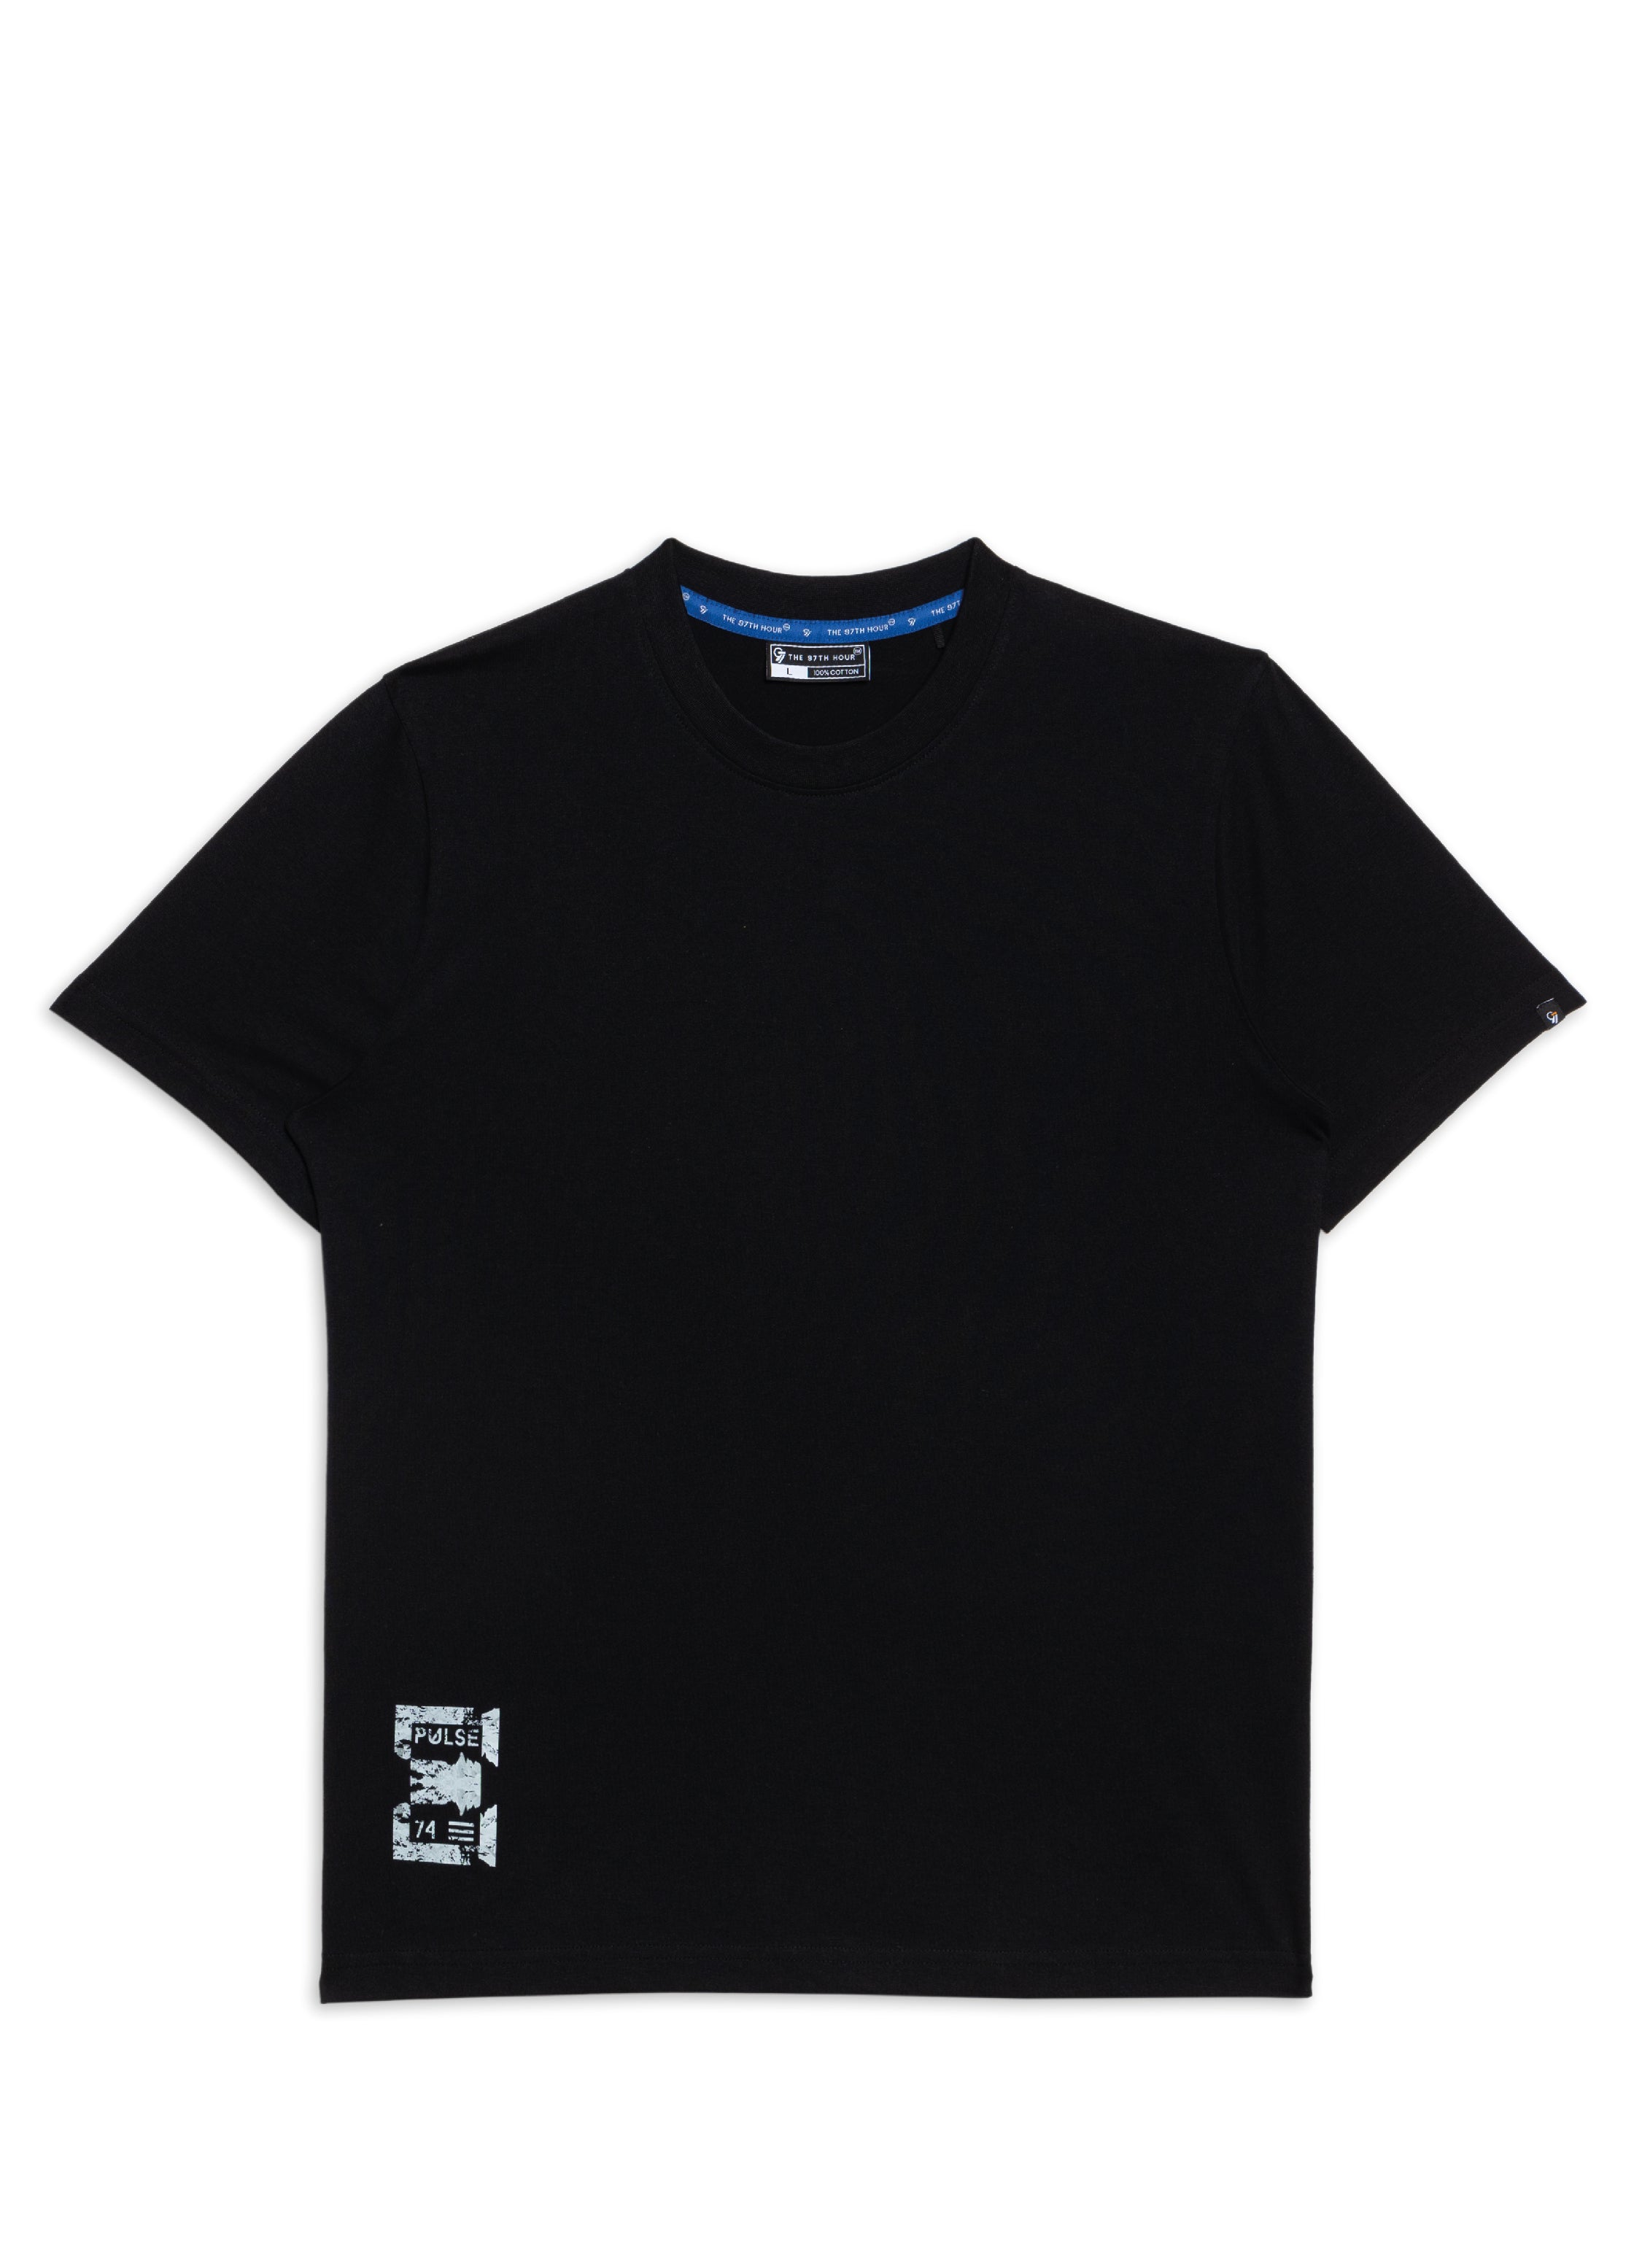 Buy The 97th Hour Abstract Pulse T-shirt - Black Tshirt Back Look